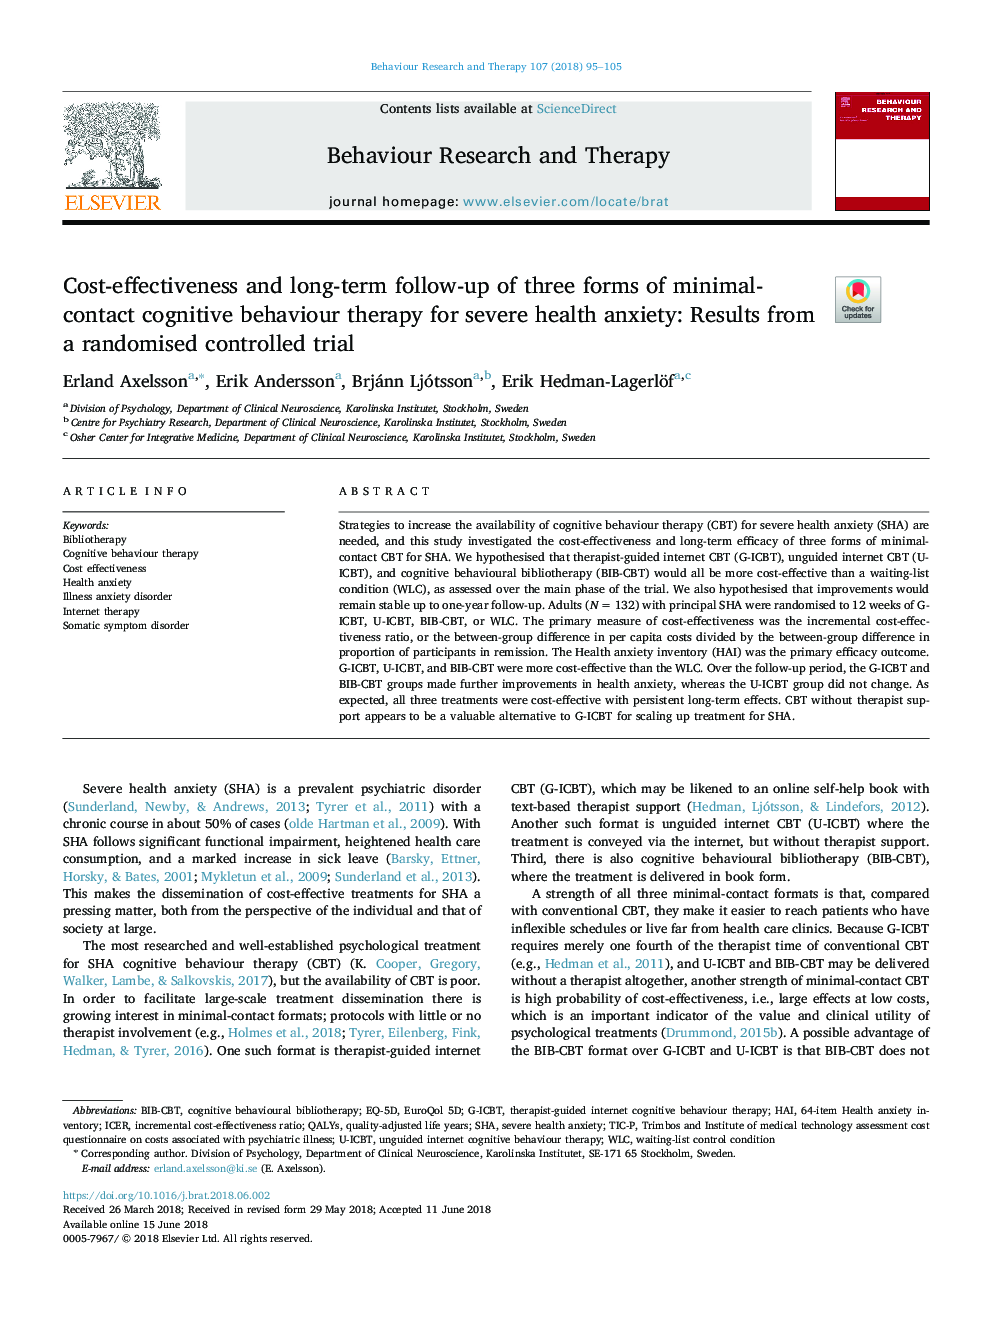 Cost-effectiveness and long-term follow-up of three forms of minimal-contact cognitive behaviour therapy for severe health anxiety: Results from a randomised controlled trial